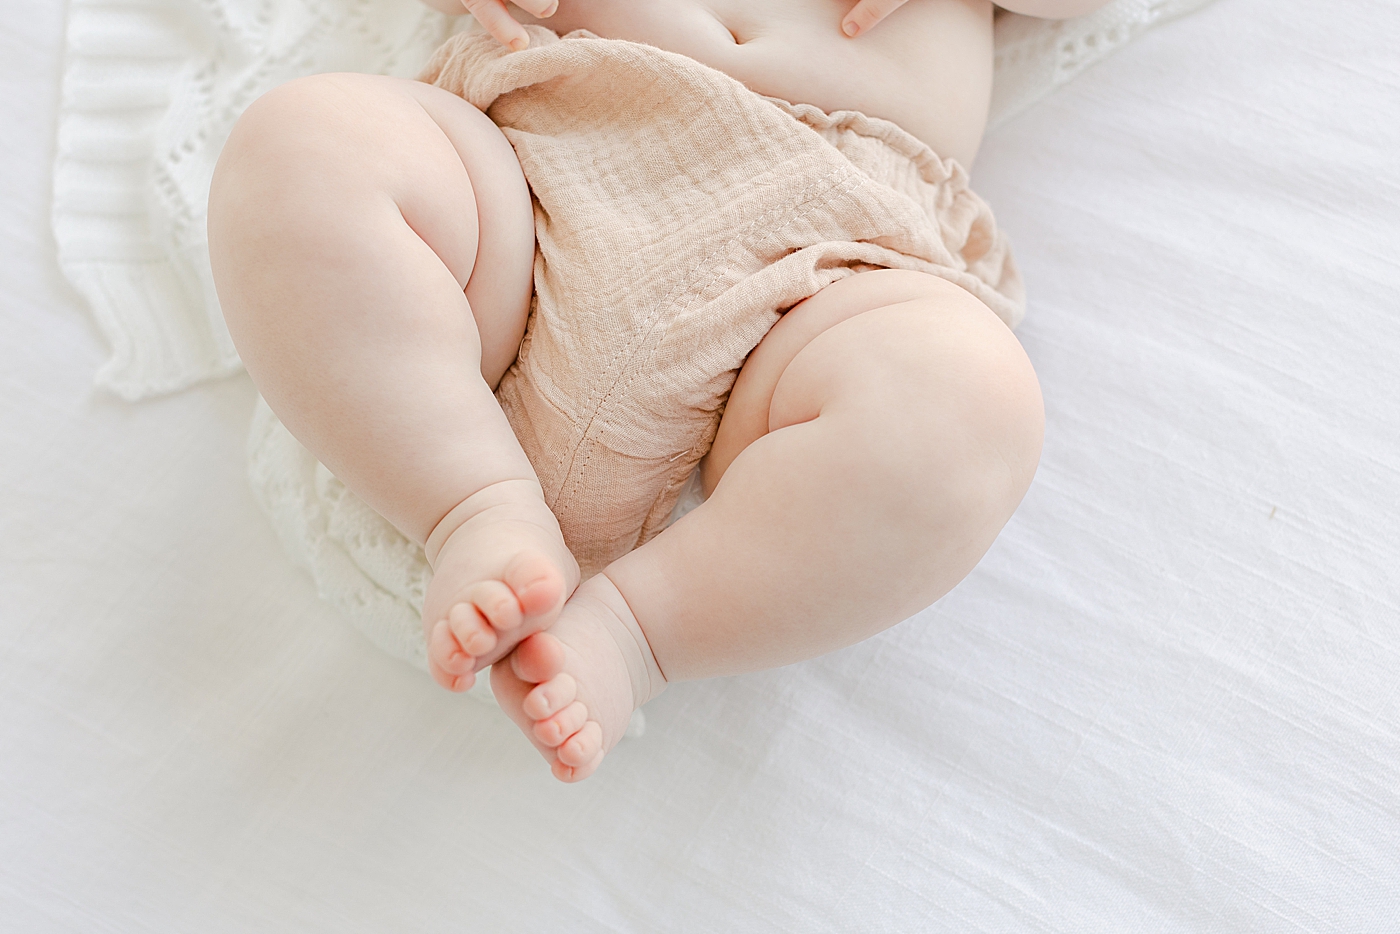 Detail of baby girl's feet | Image by Sana Ahmed Photography